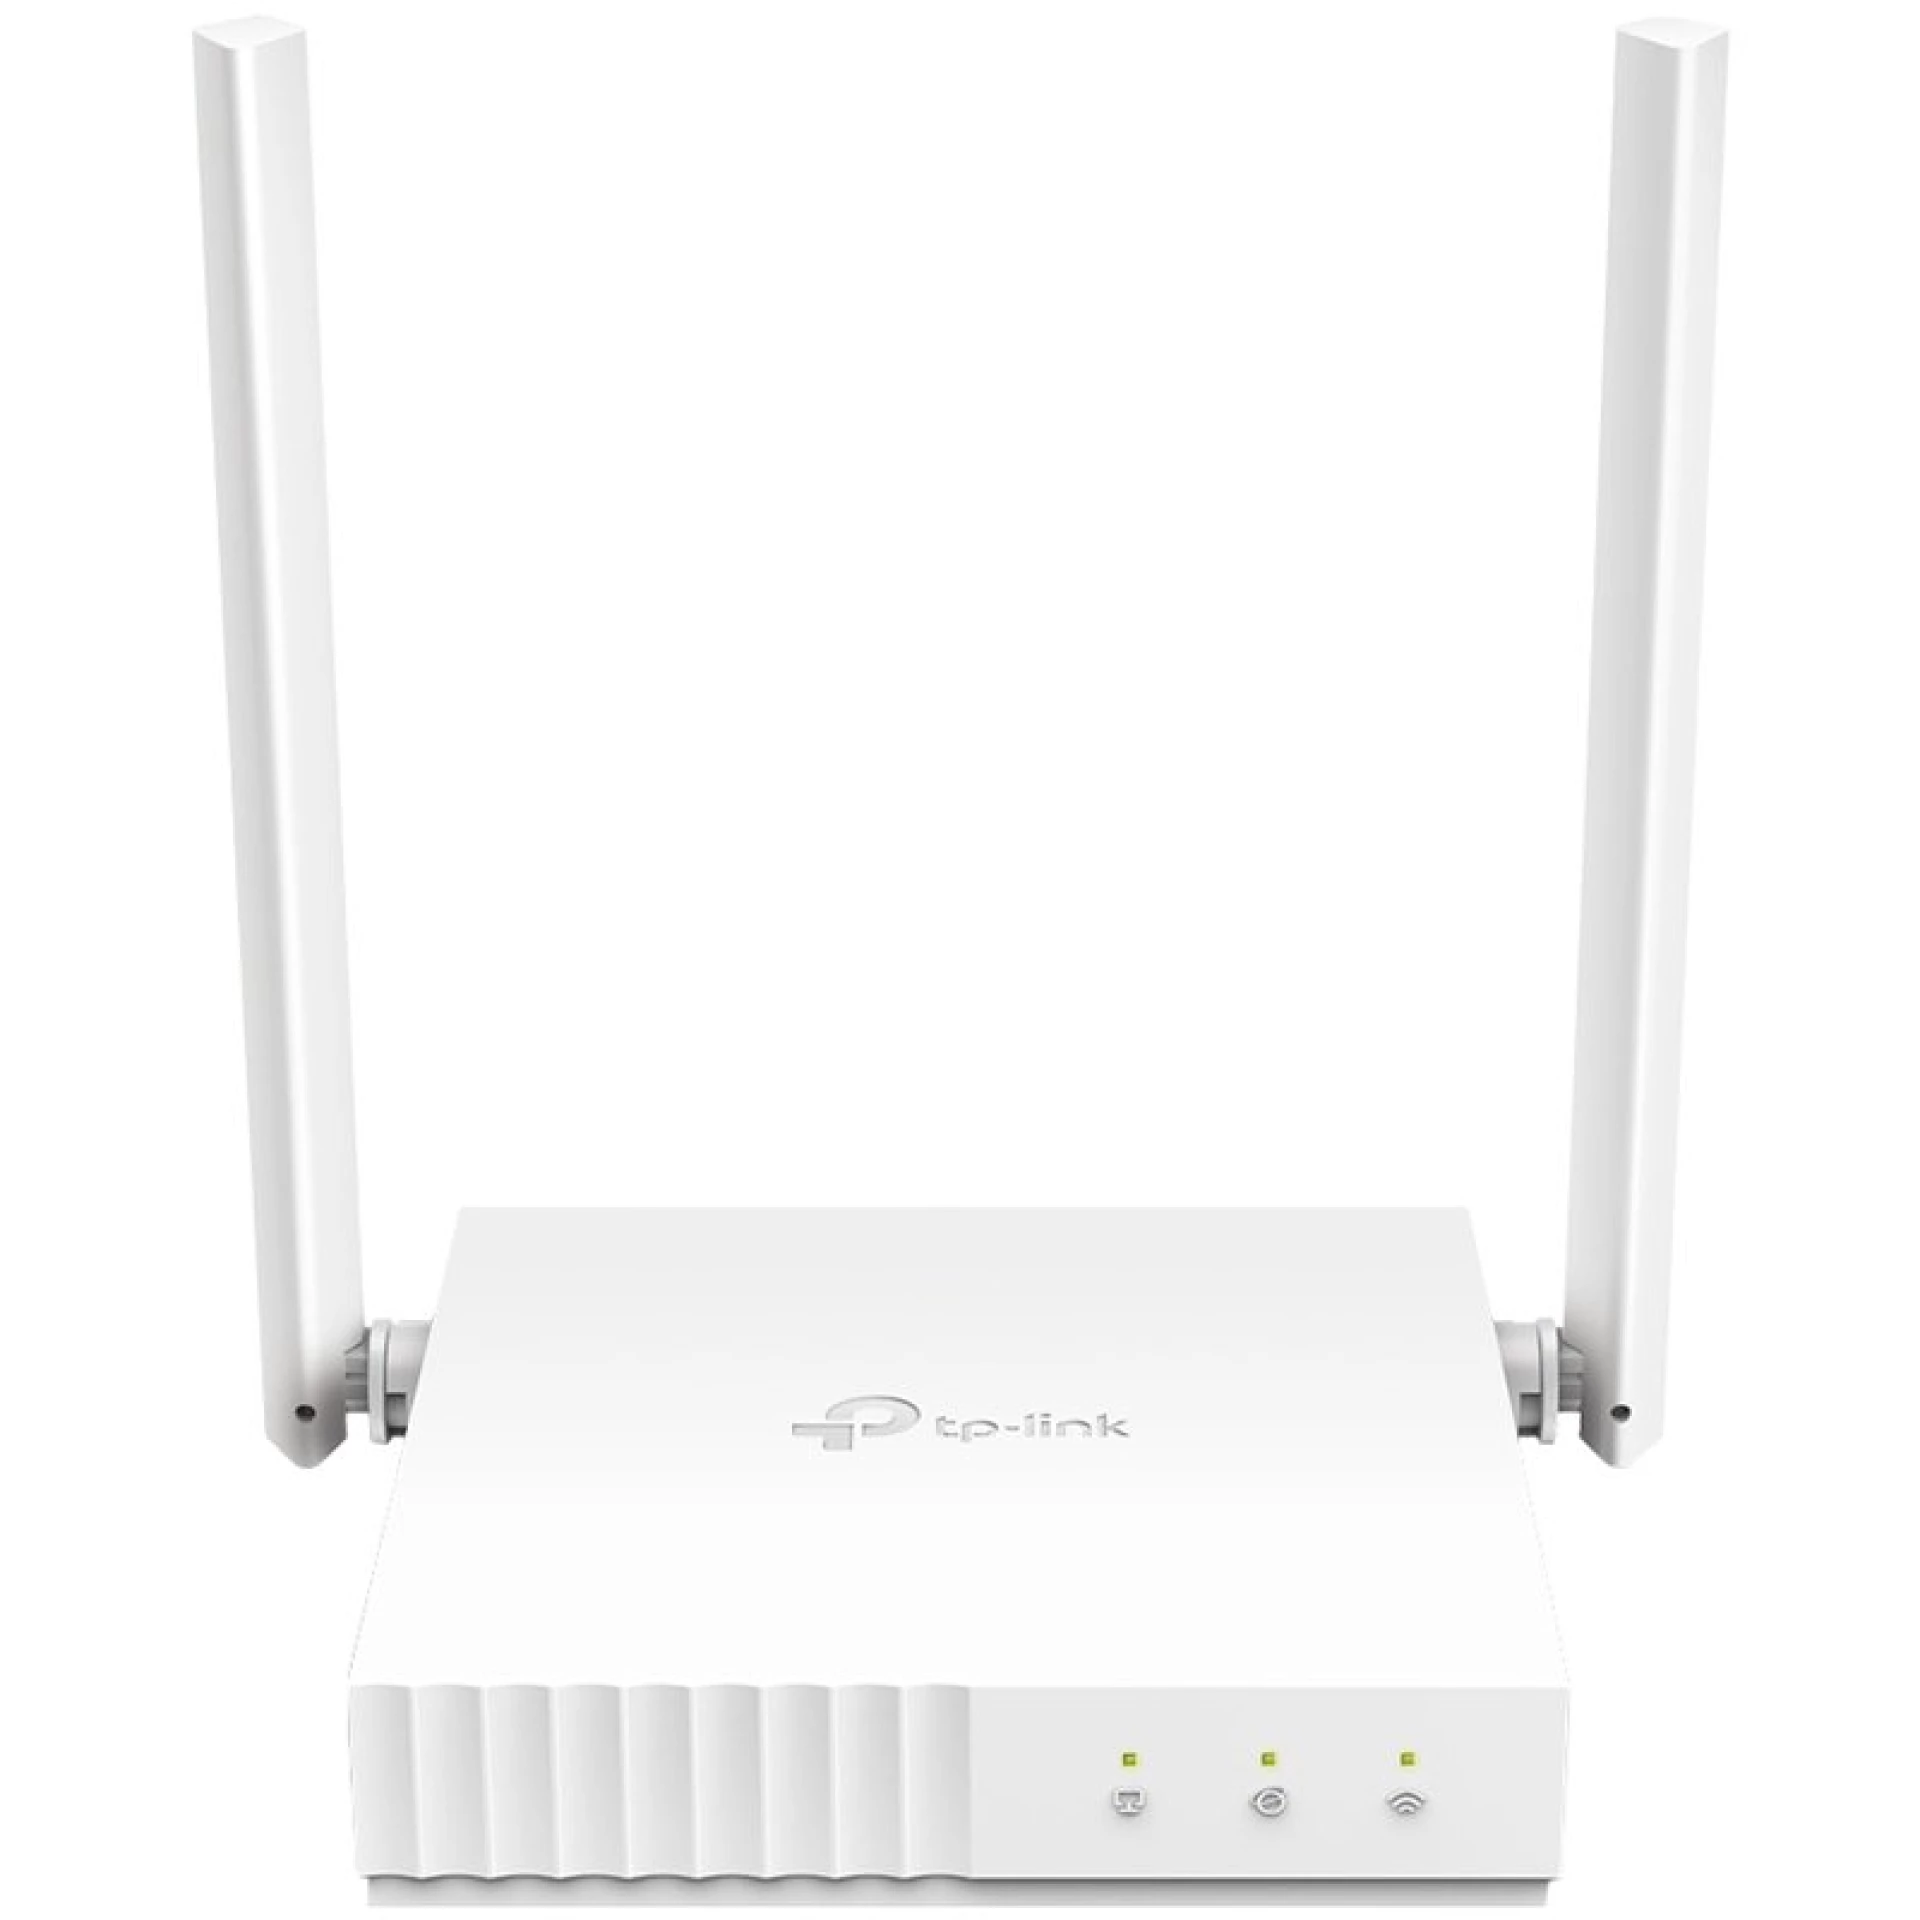 TP-Link TL-WR844N wireless router